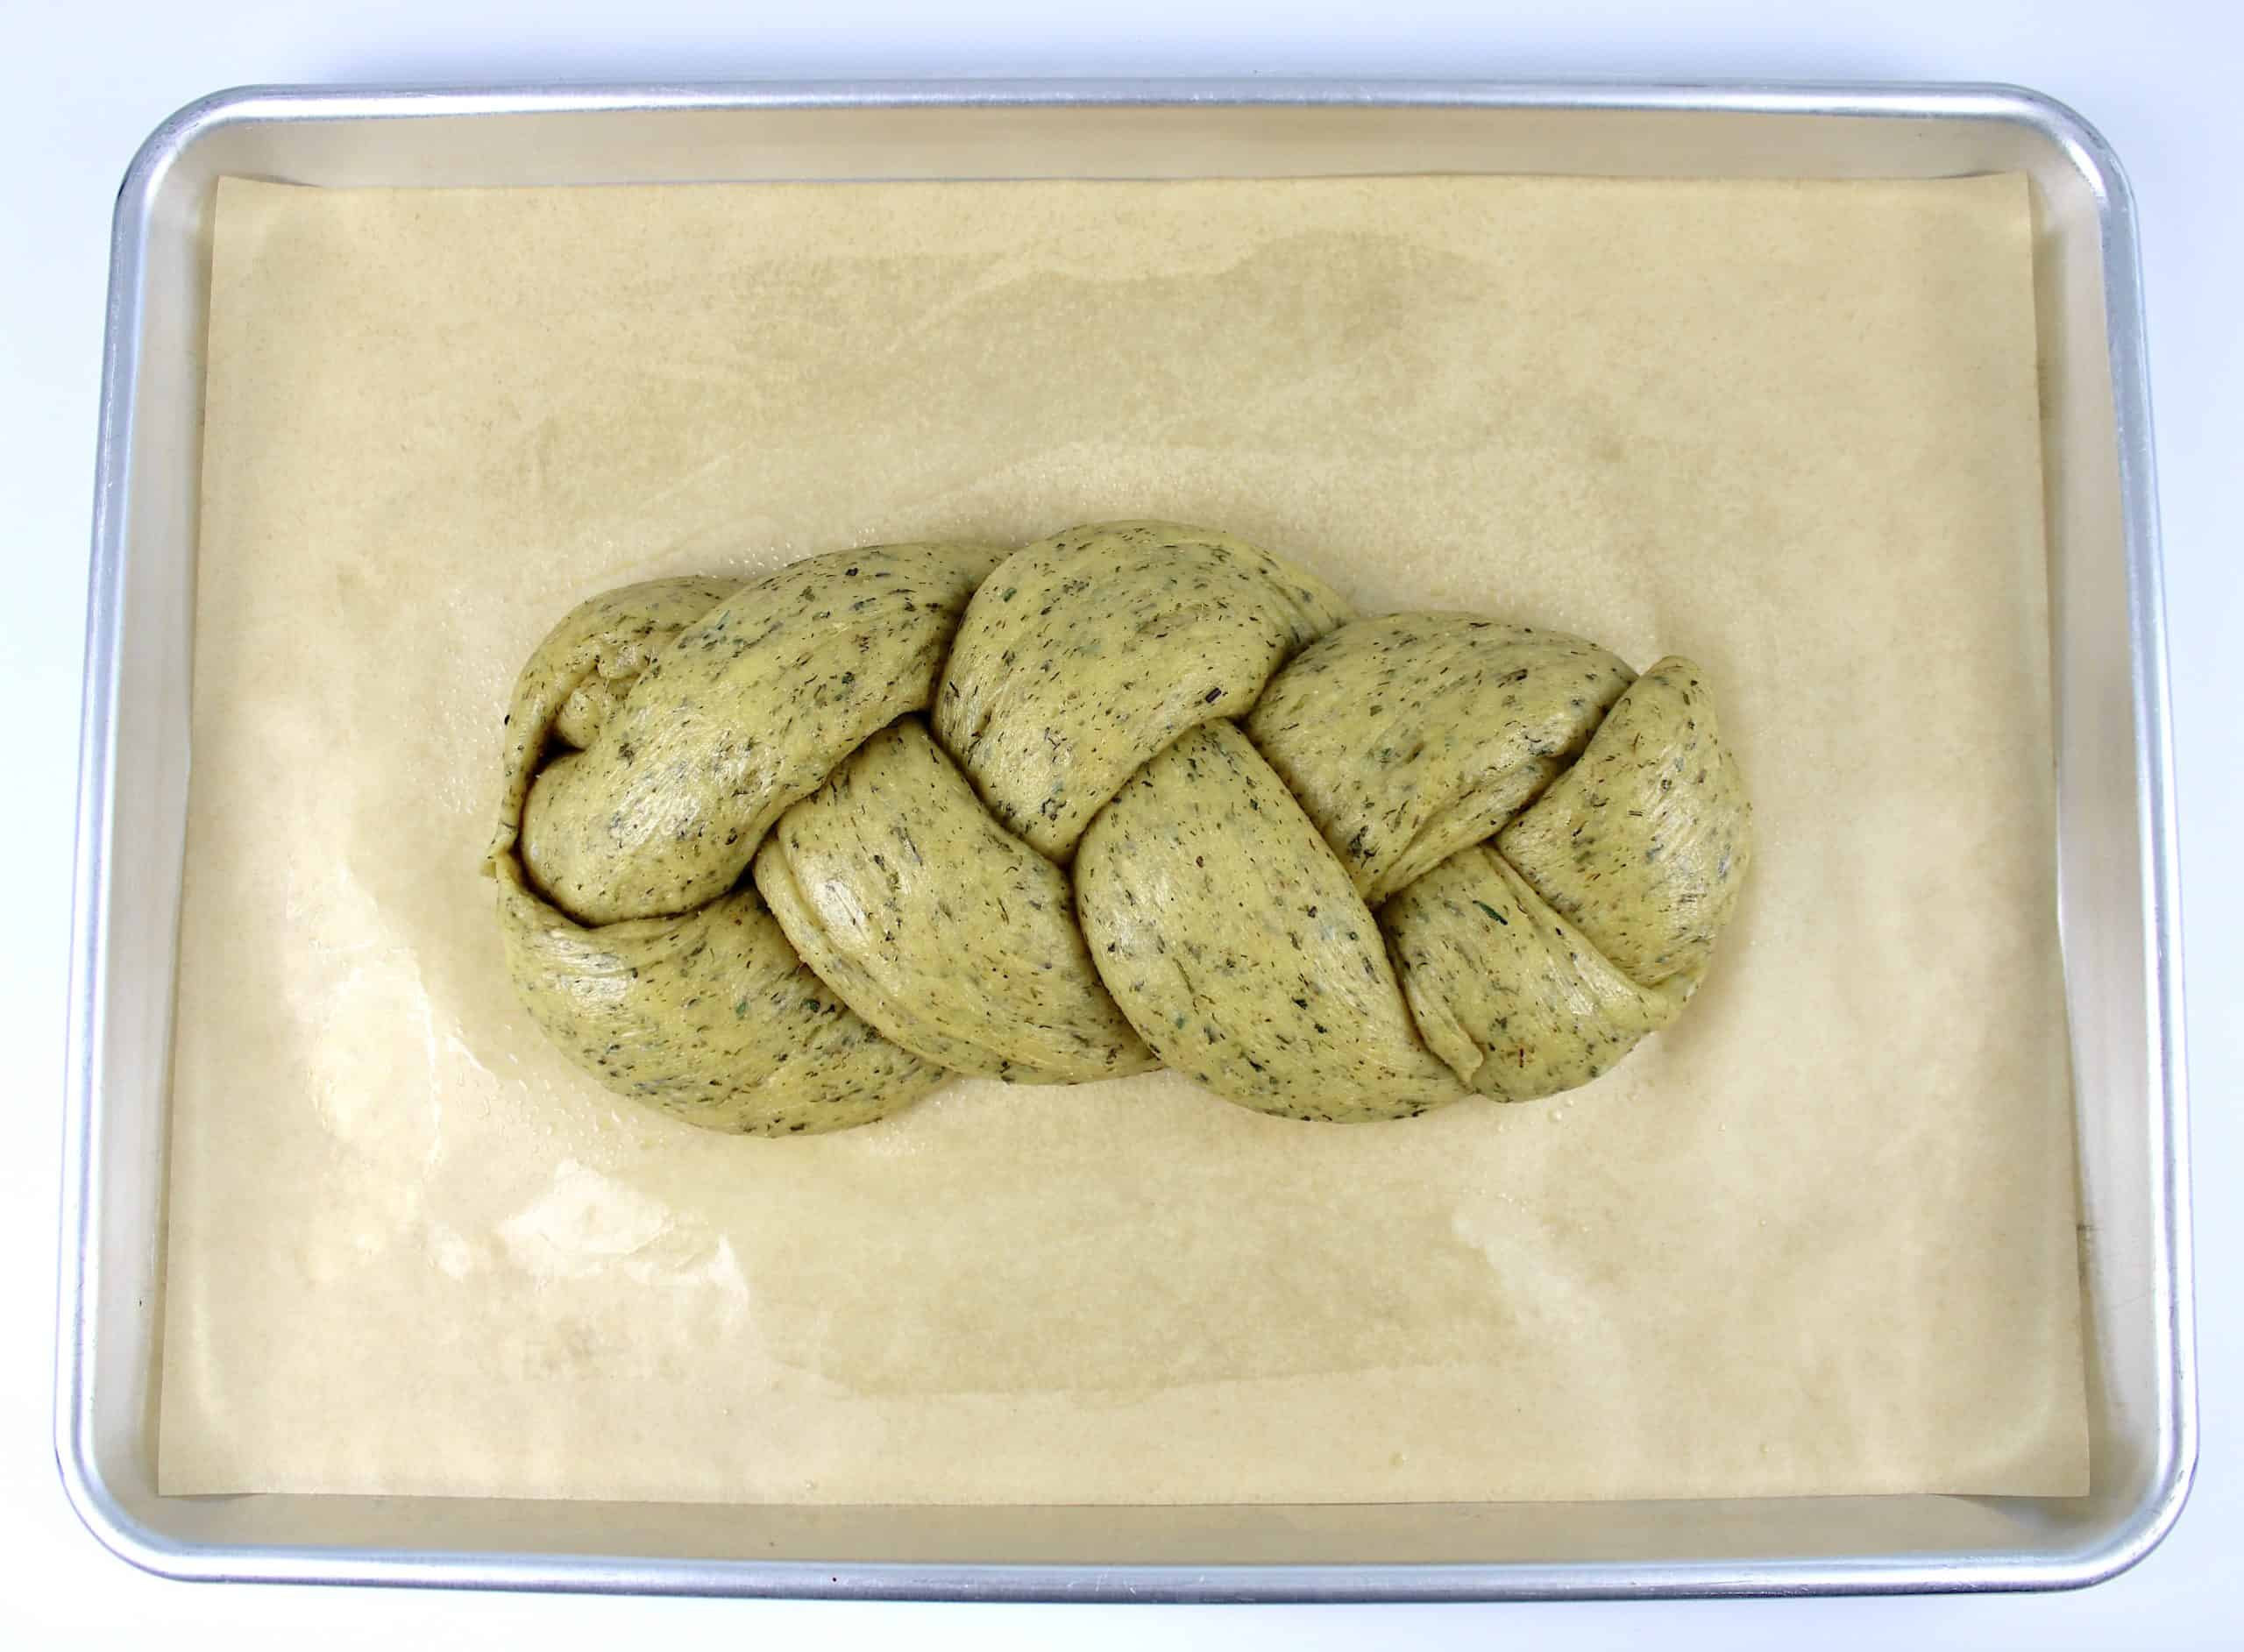 proofed Keto Braided Herb Bread dough unbaked on parchment lined baking sheet